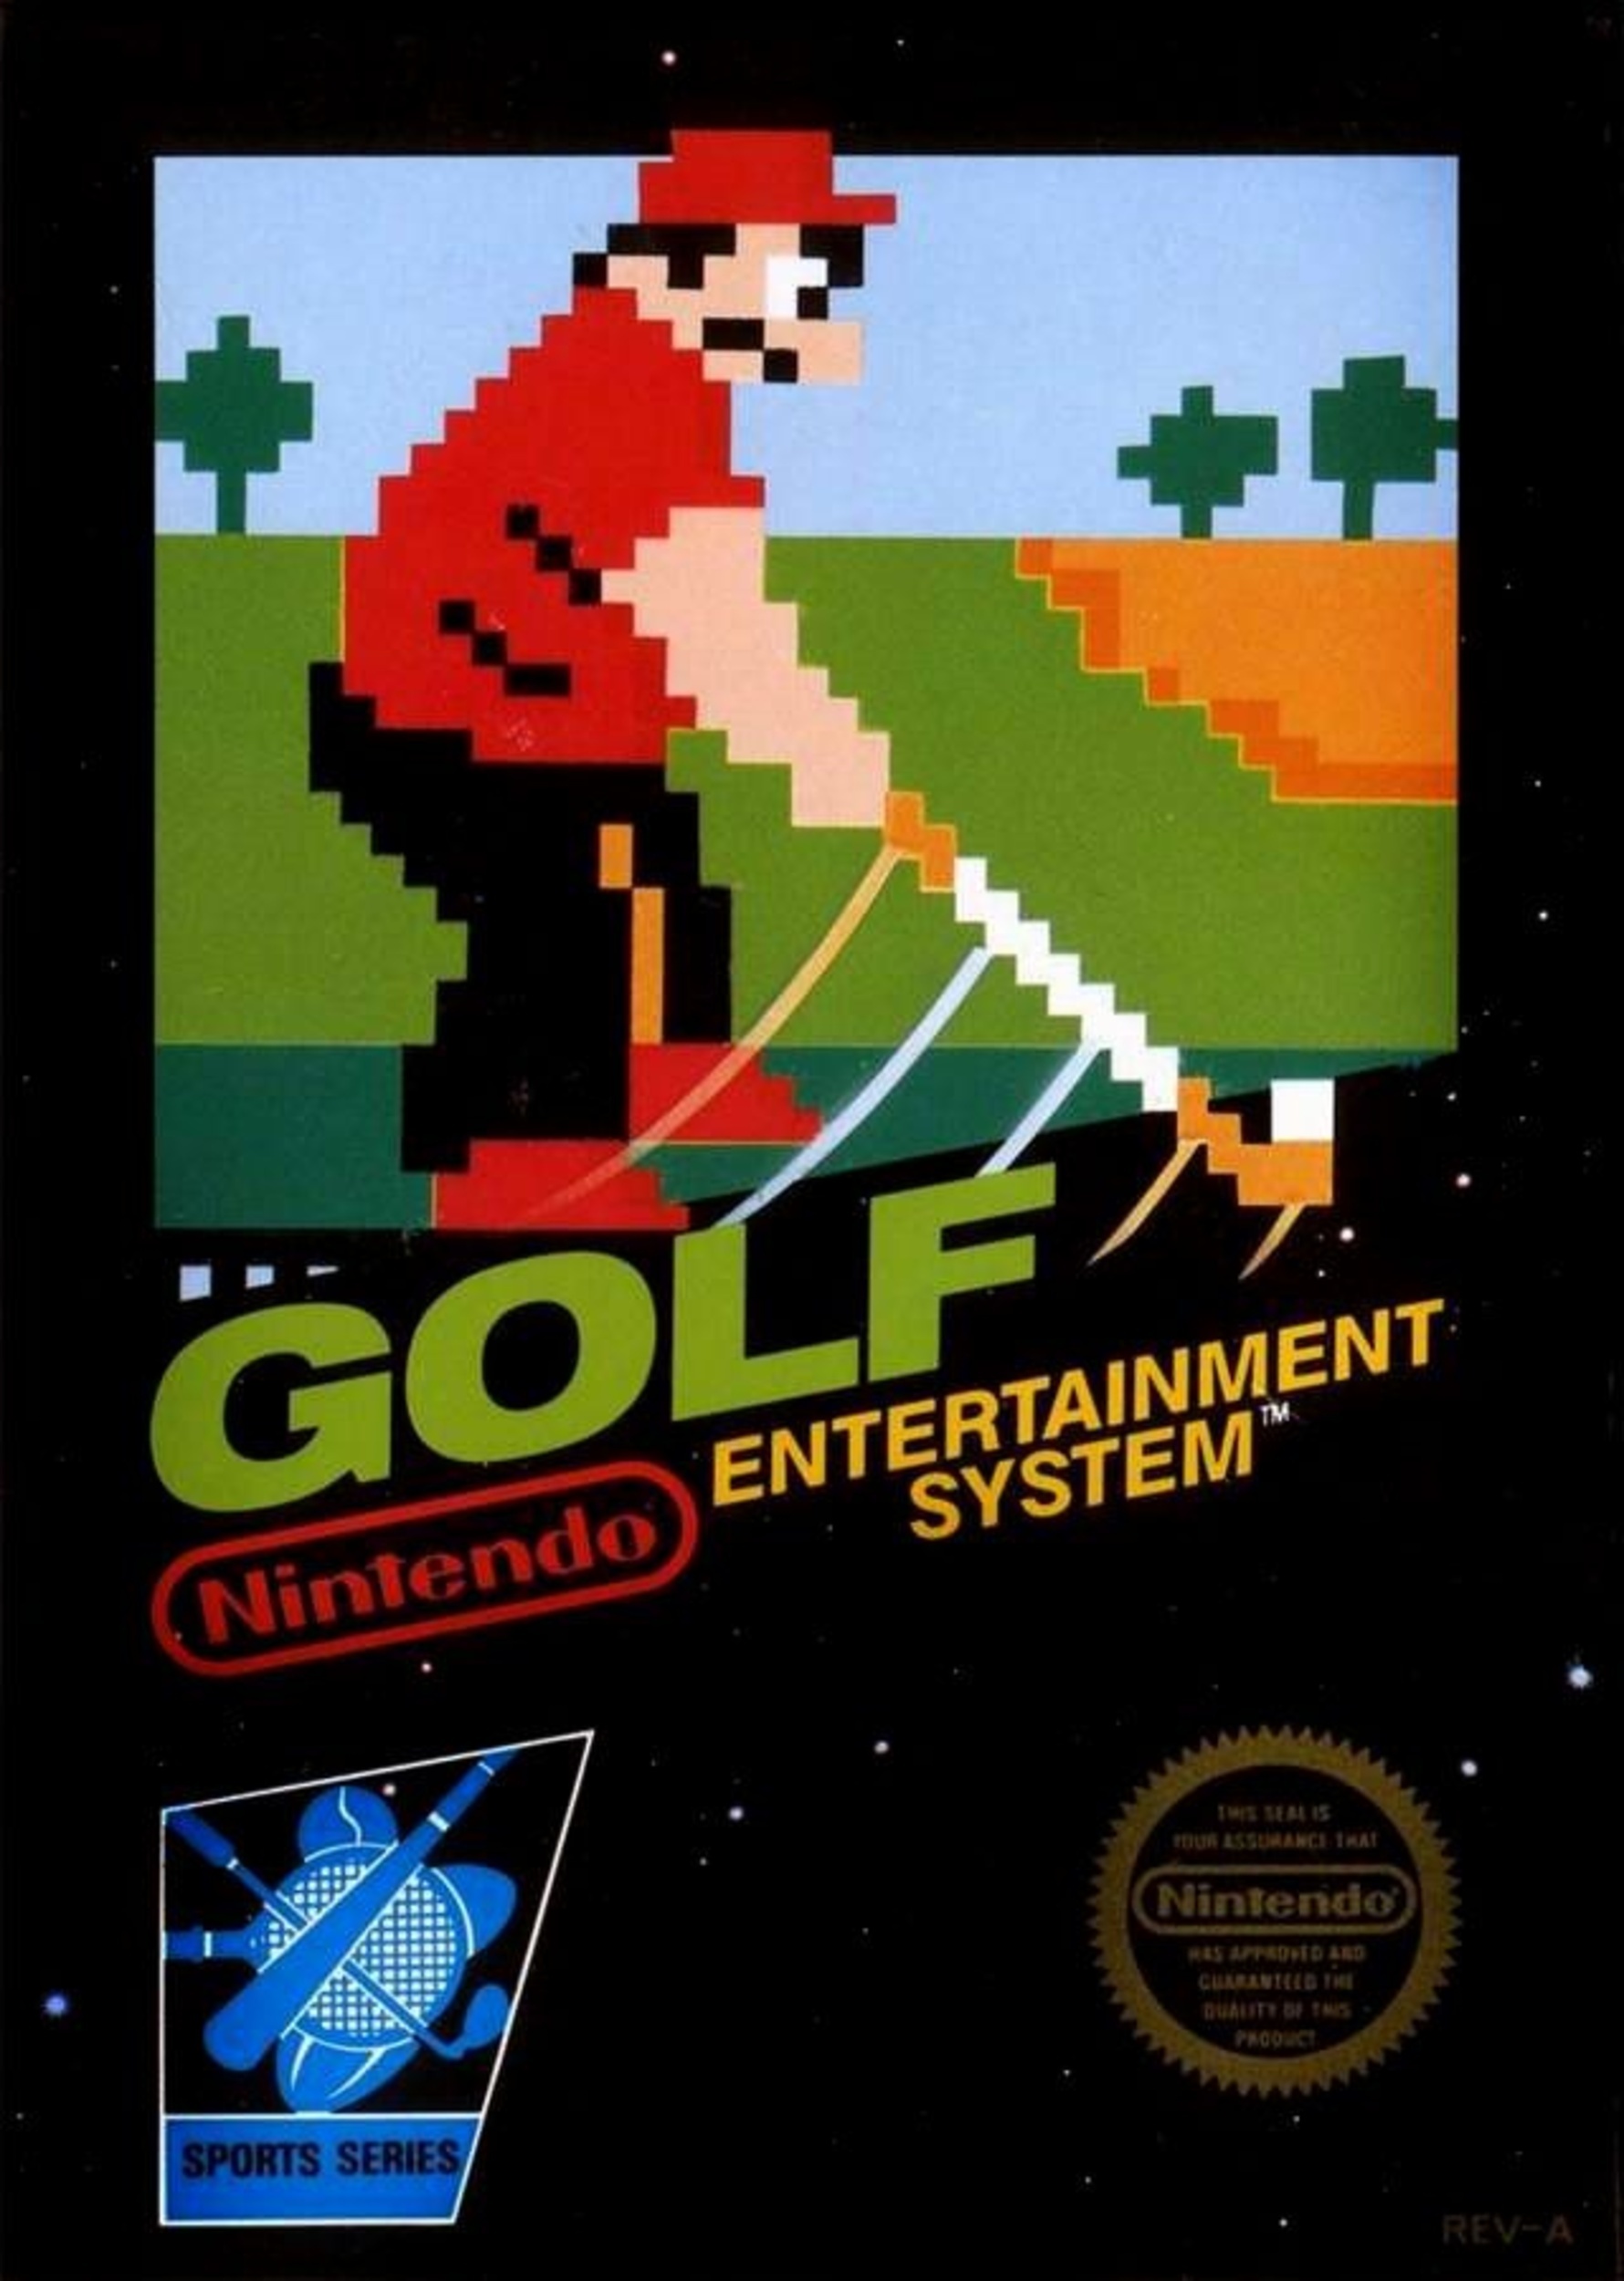 <p>Remember that episode of <em>The Simpsons</em> where Bart gets caught shoplifting a copy of his favorite game, <em>Bonestorm</em>, and his mother forgives him by buying him a copy of <em>Lee Carvalho's Putting Challenge</em>? <em>Golf</em> is the real-world version of that. This blackbox NES title is barely a golf game. The challenge and courses are about as boring as the game's unimaginative title. The sound effects are literally one note and sound like they came from an early prototype for <em>Electronic Battleship</em>.</p><p>You may also like: <a href='https://www.yardbarker.com/entertainment/articles/20_facts_you_might_not_know_about_beetlejuice/s1__37660945'>20 facts you might not know about 'Beetlejuice'</a></p>